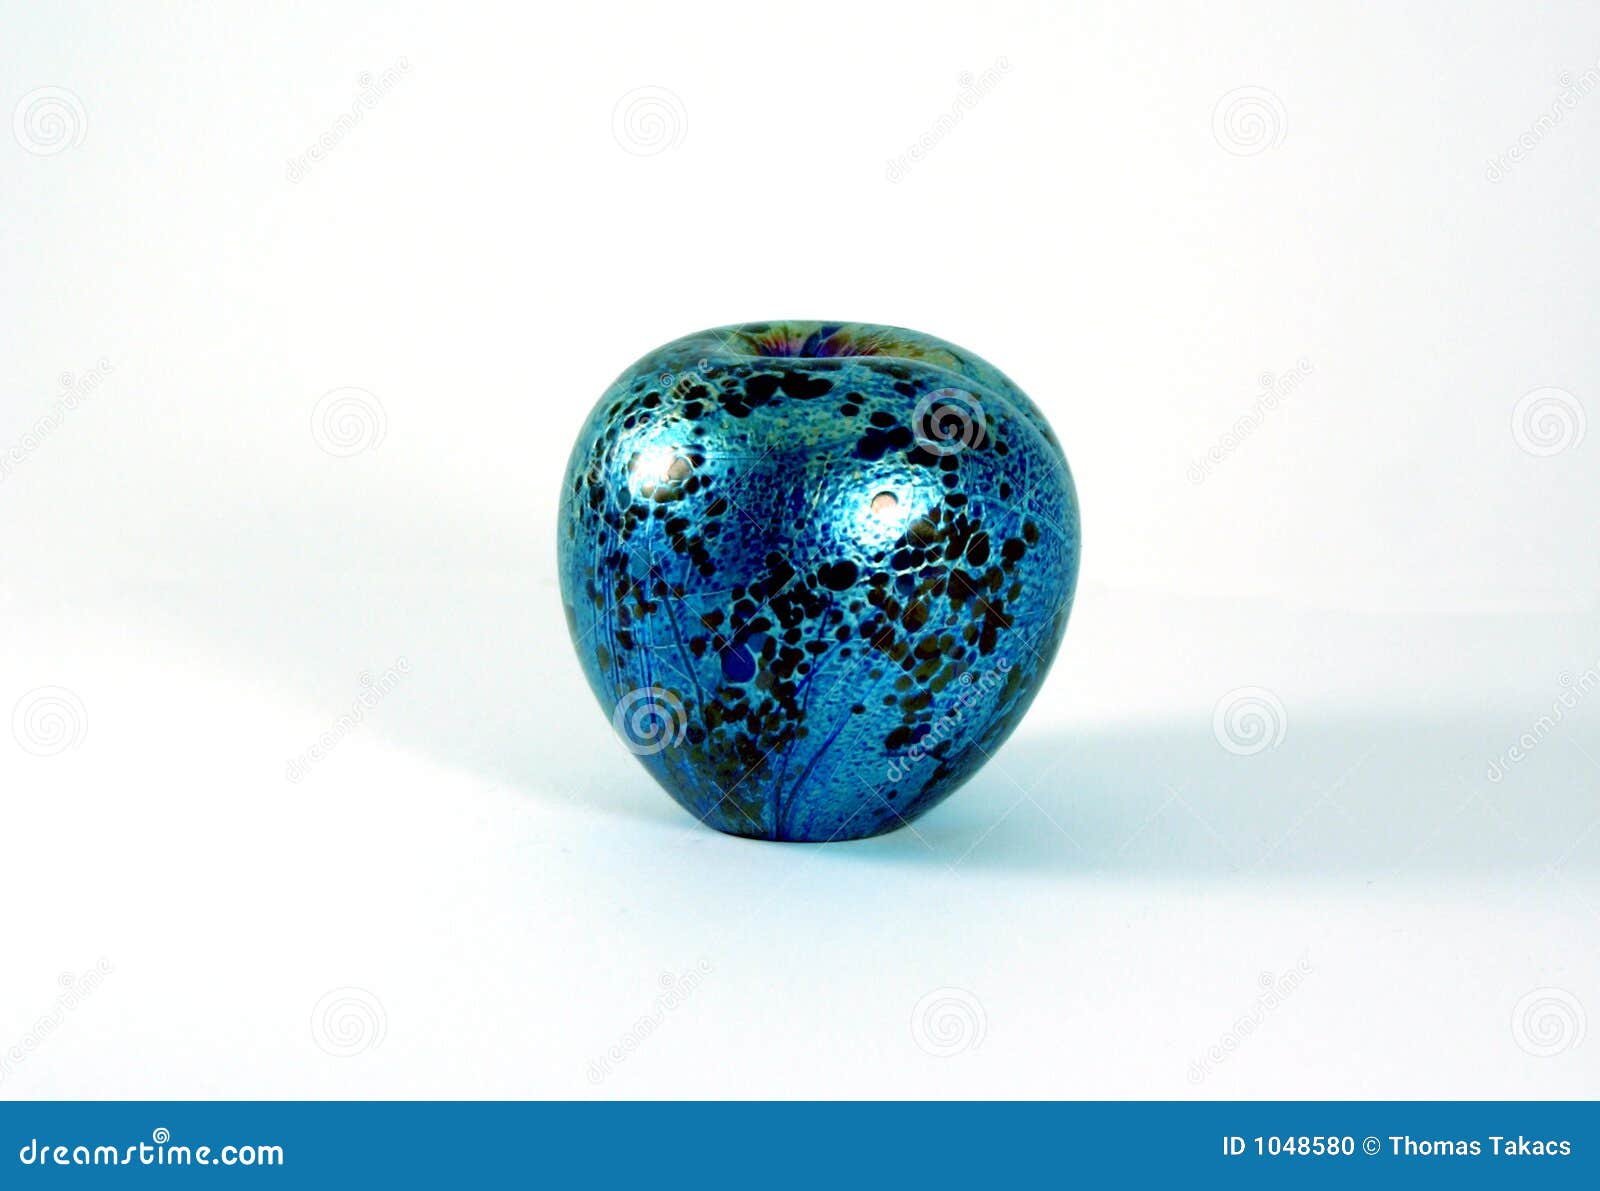 marble paperweight